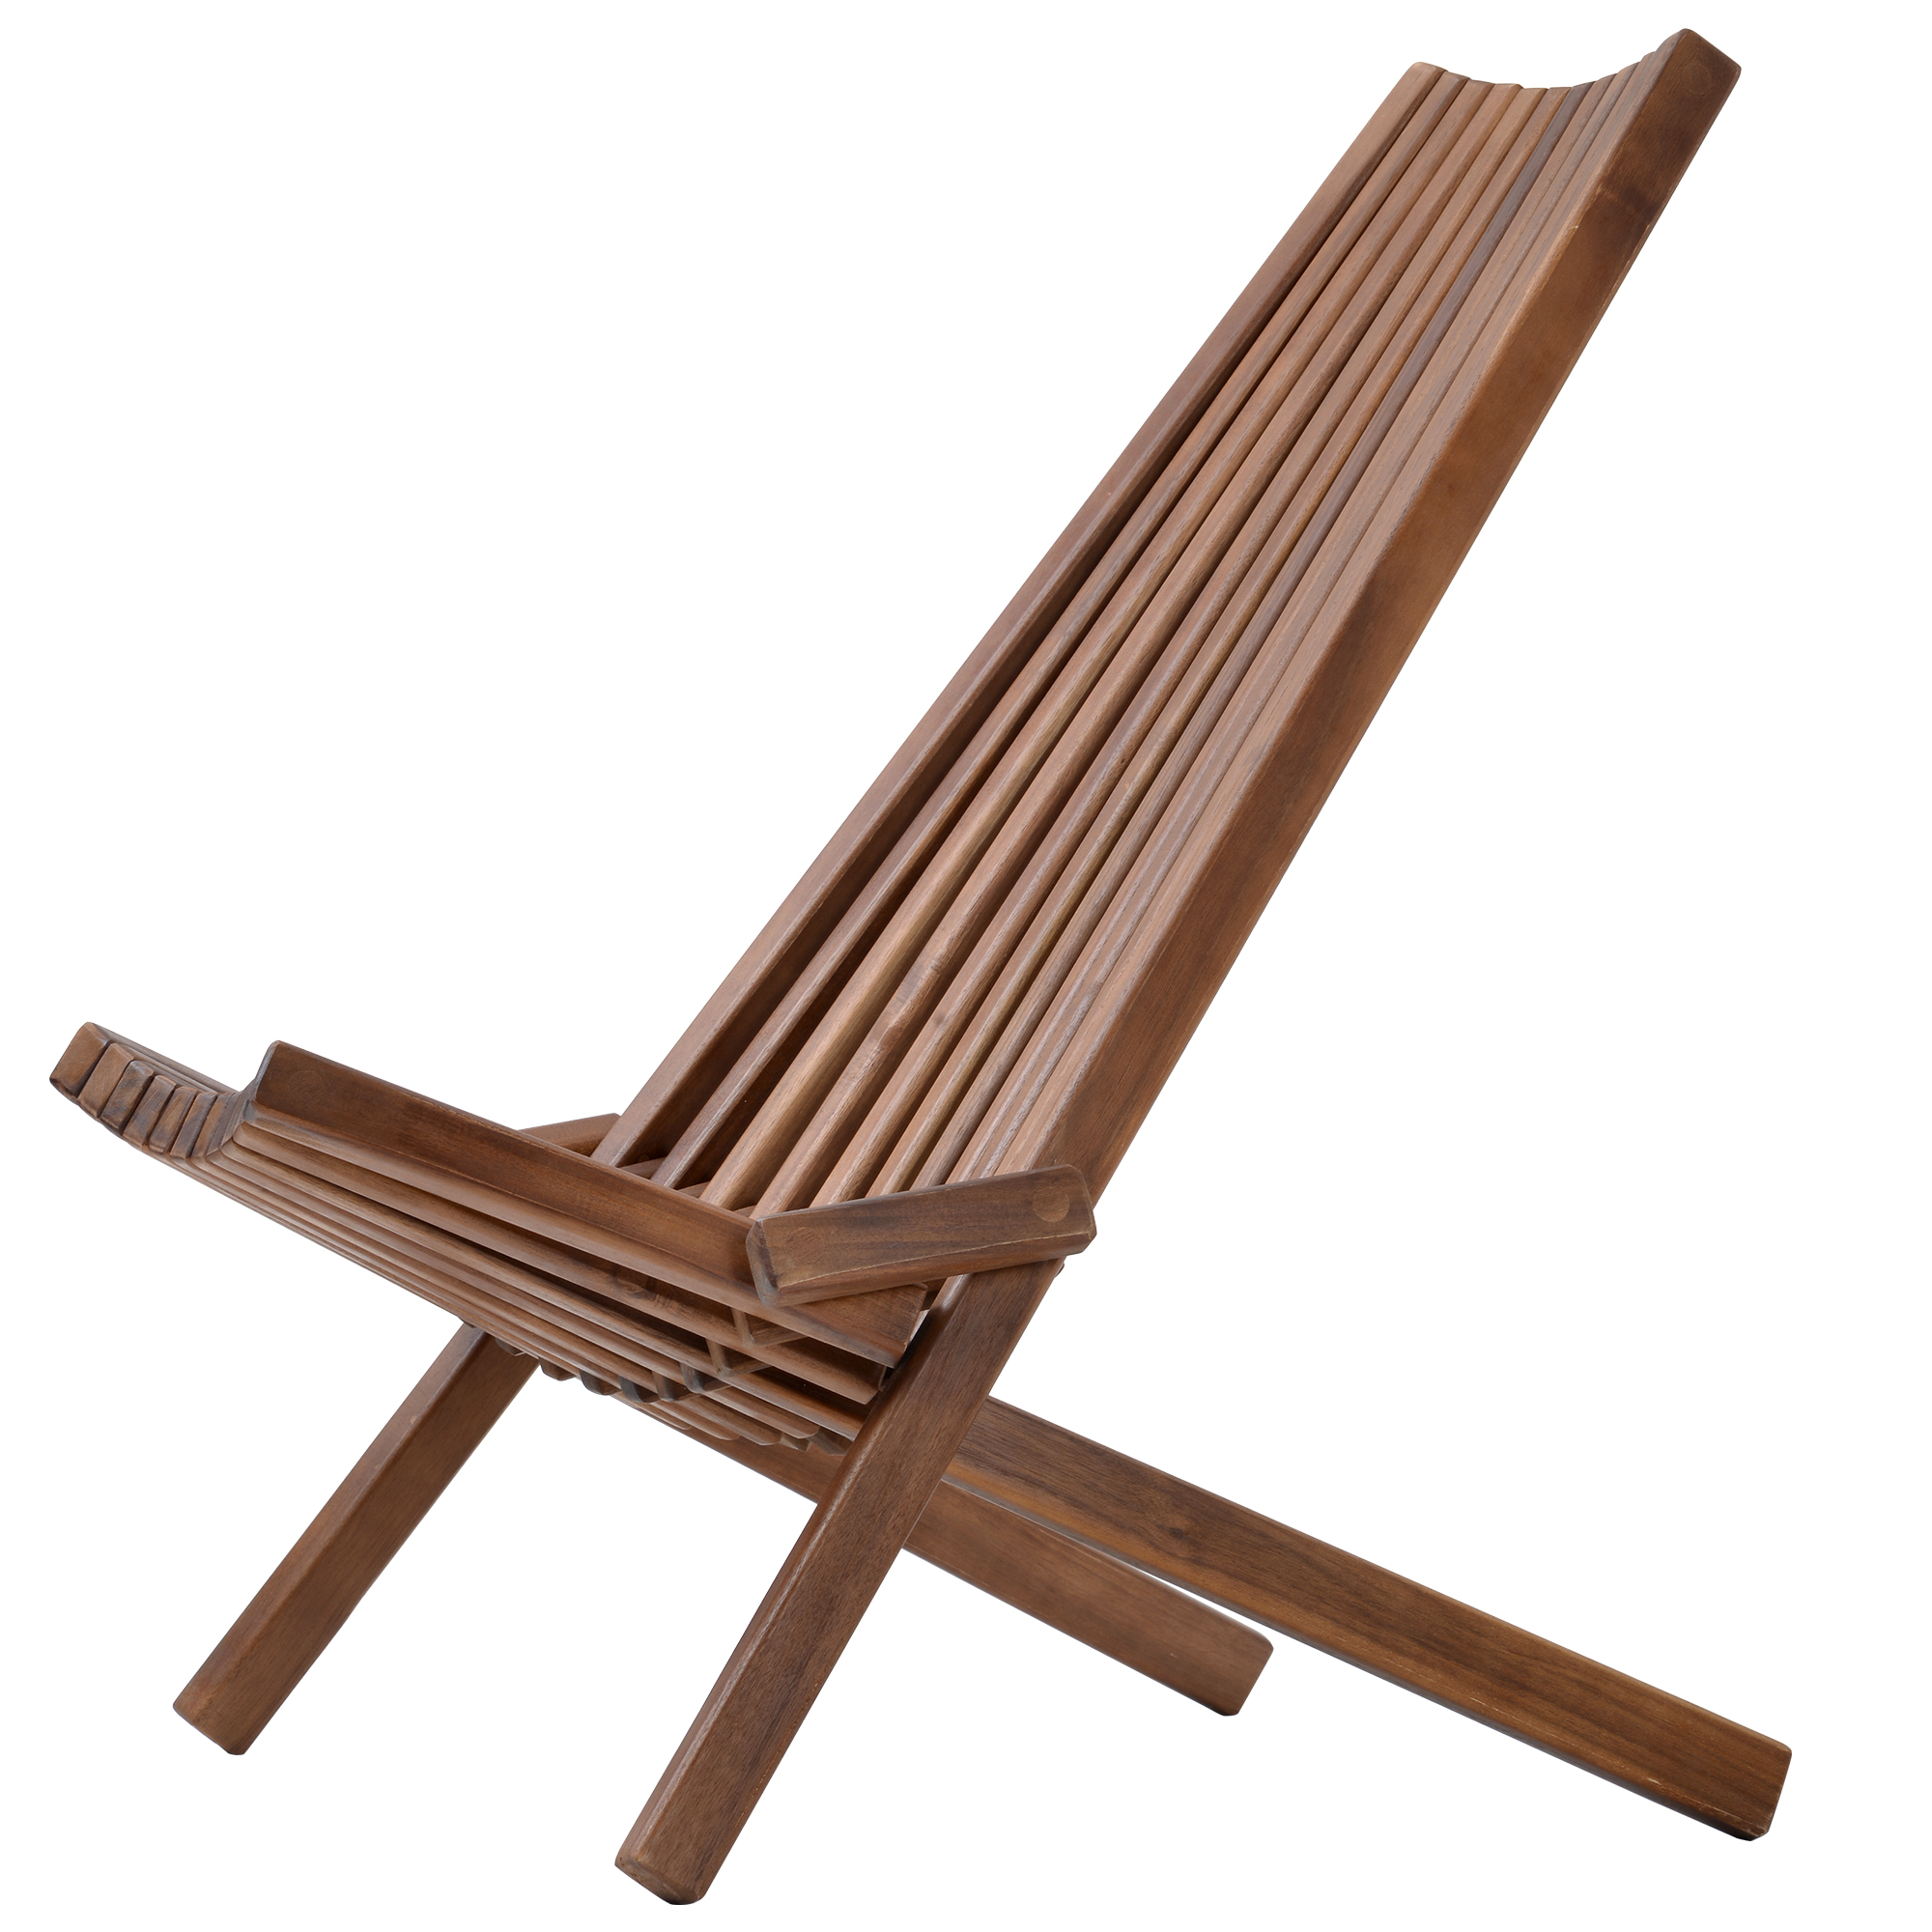 KOWILK Wooden Folding Chair for Outdoor, Low Profile Acacia Wood Lounge Chair with FSC Certified Acacia Wood, Fully Assembled (Espresso) - image 3 of 9